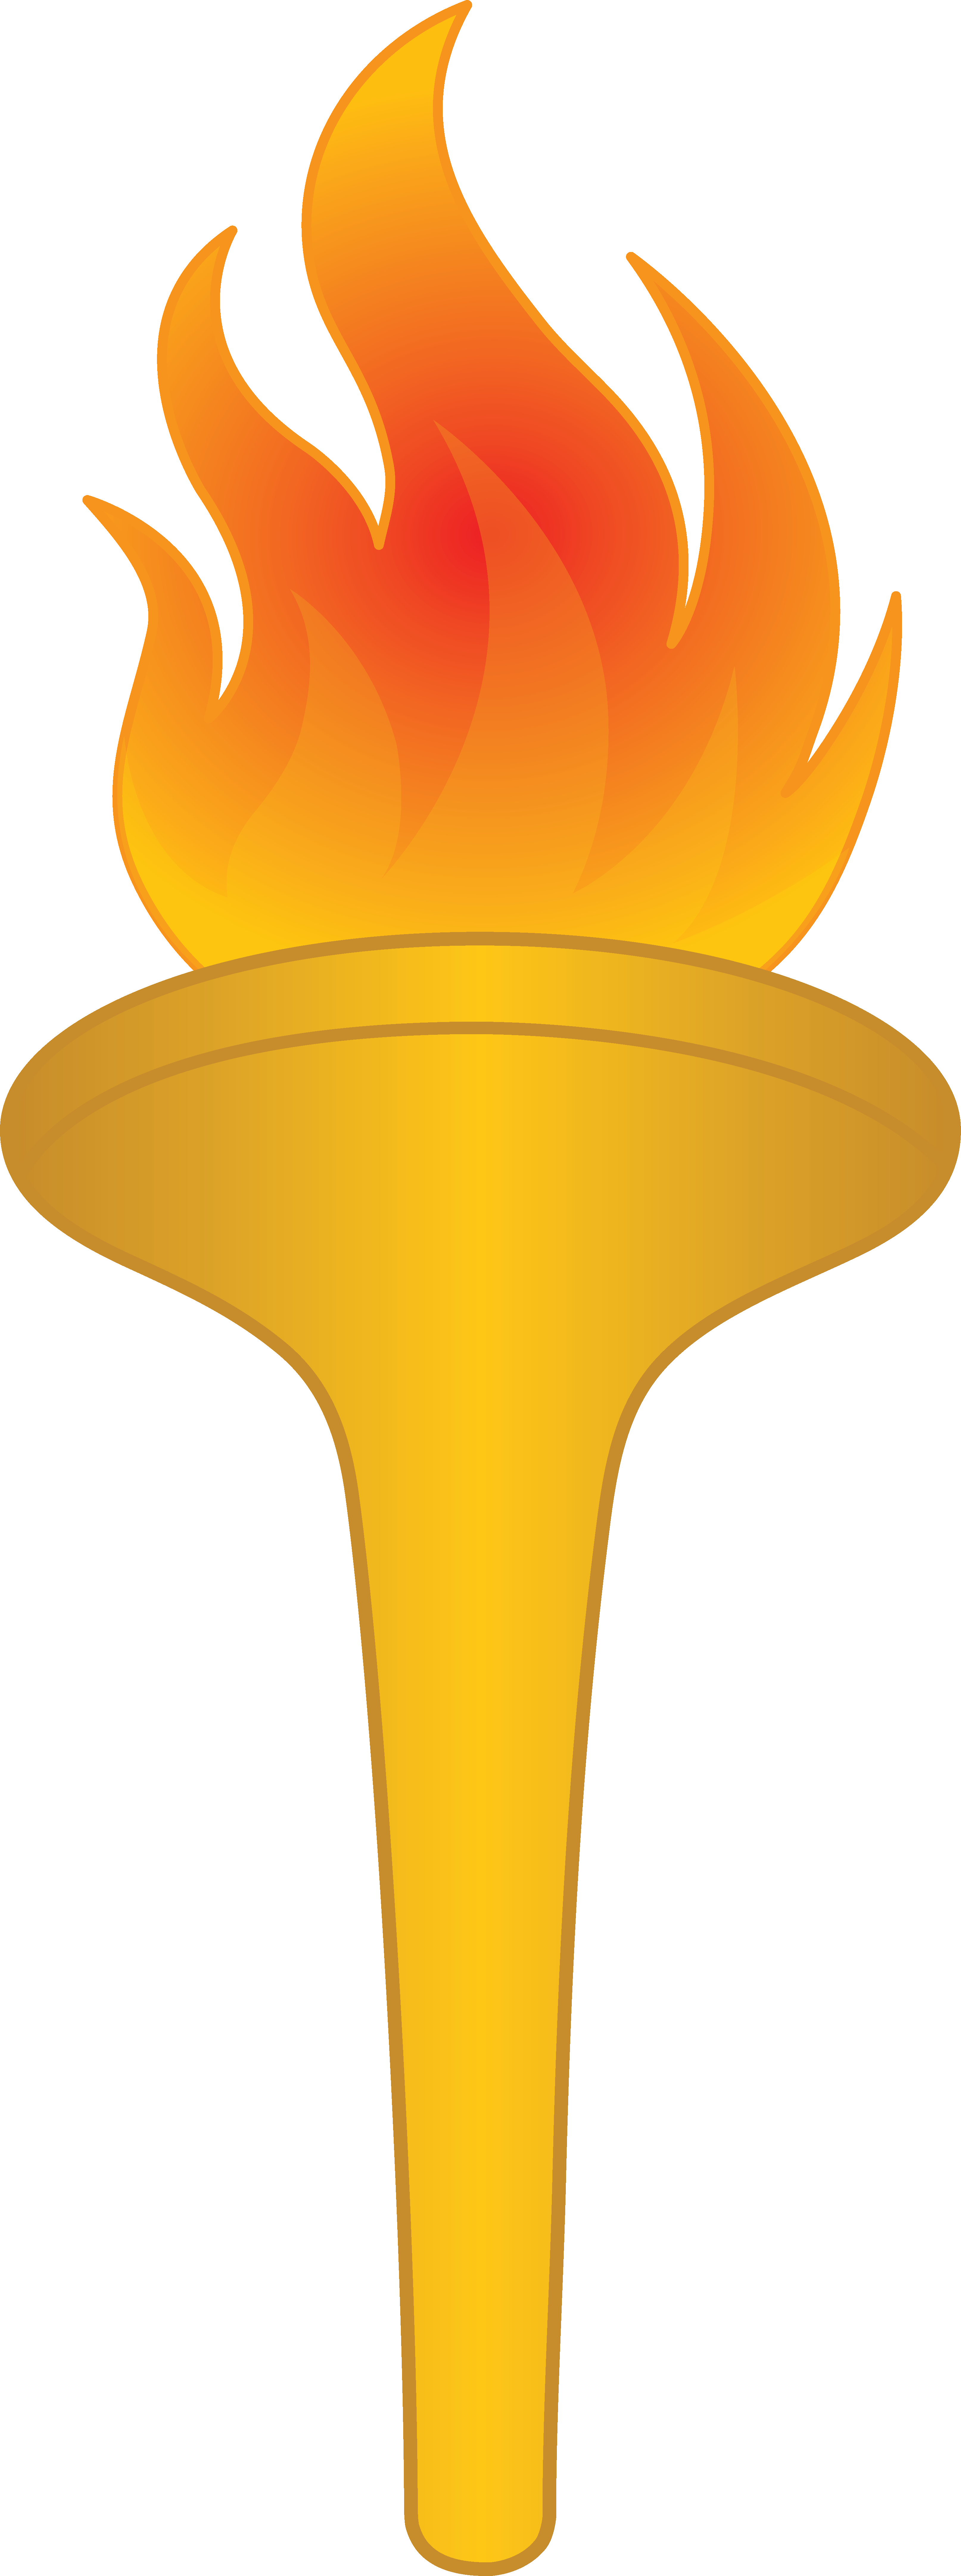 Fire Torch Clipart Png Gallery